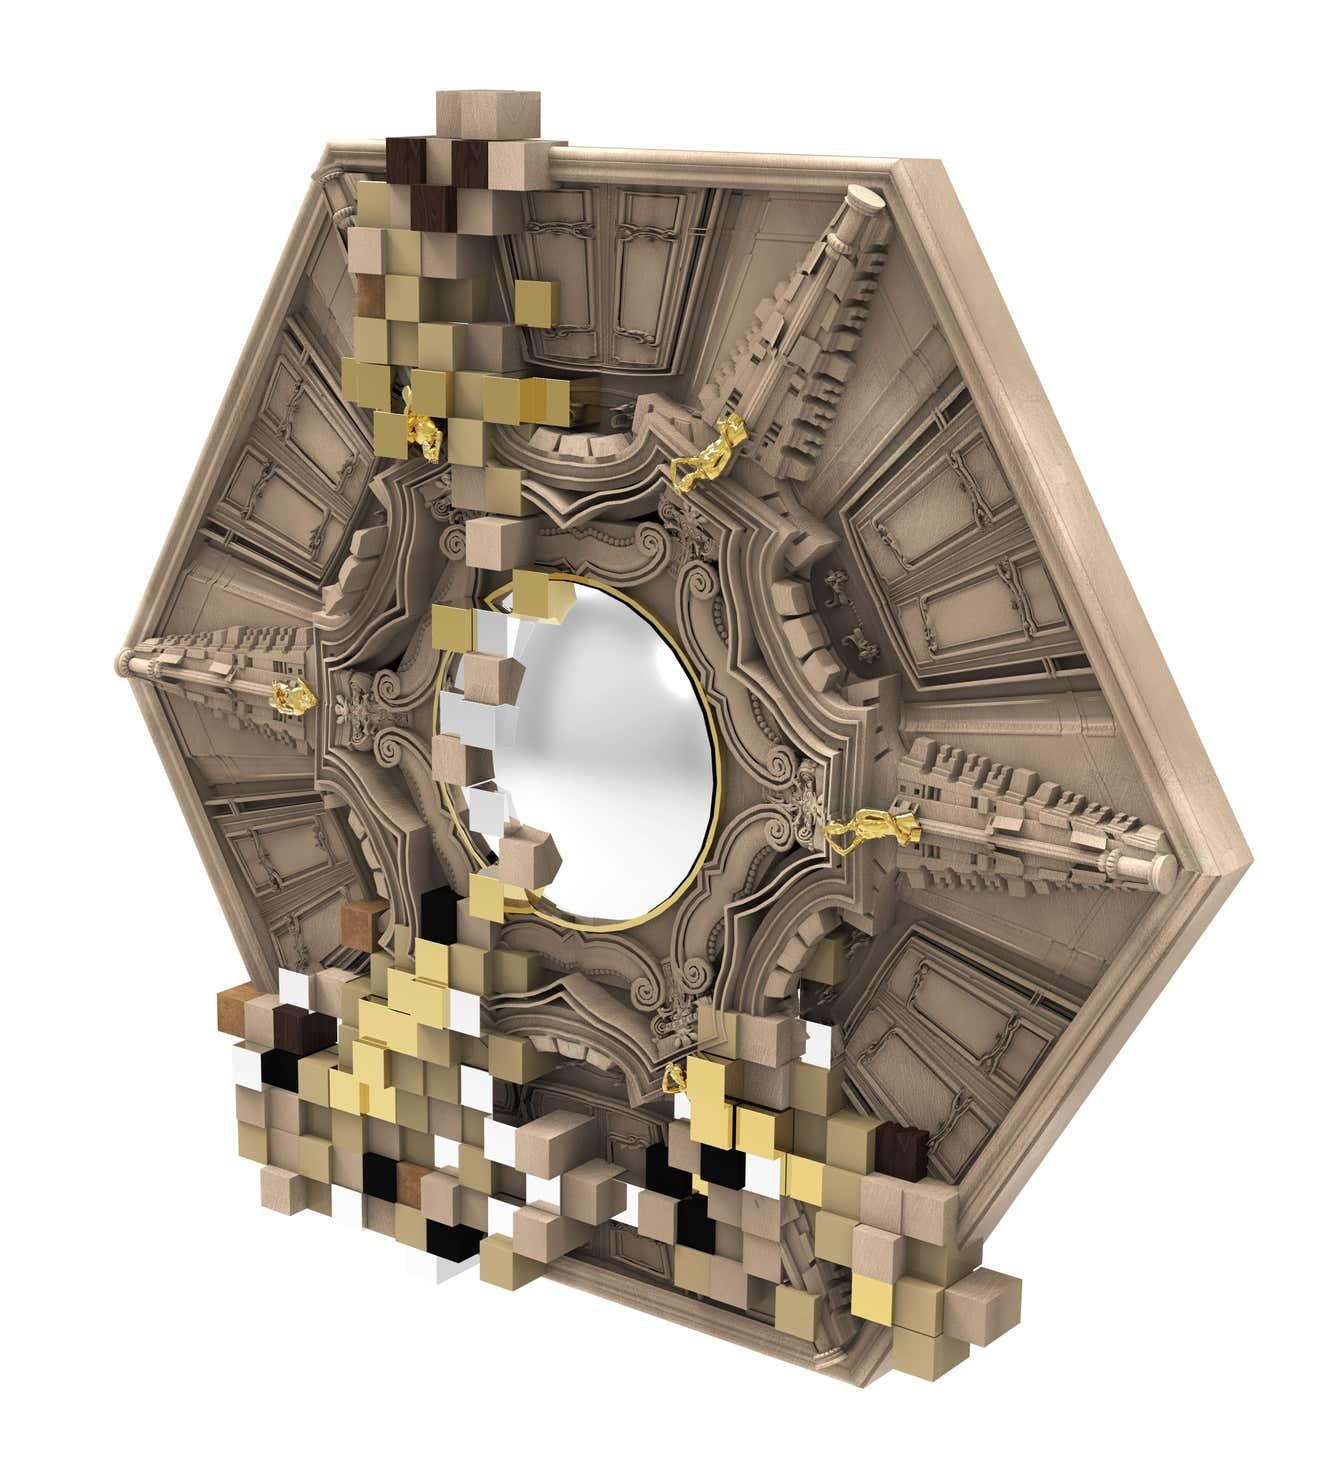 Mirror pixels
Product features: Poplar, six different finishes: colored in champagne, rosewood veneer, convex mirror, gold leaf, silver leaf.
Estimated production time: 15 - 16 weeks
Measures: Height: 10 cm
Width: 160 cm.